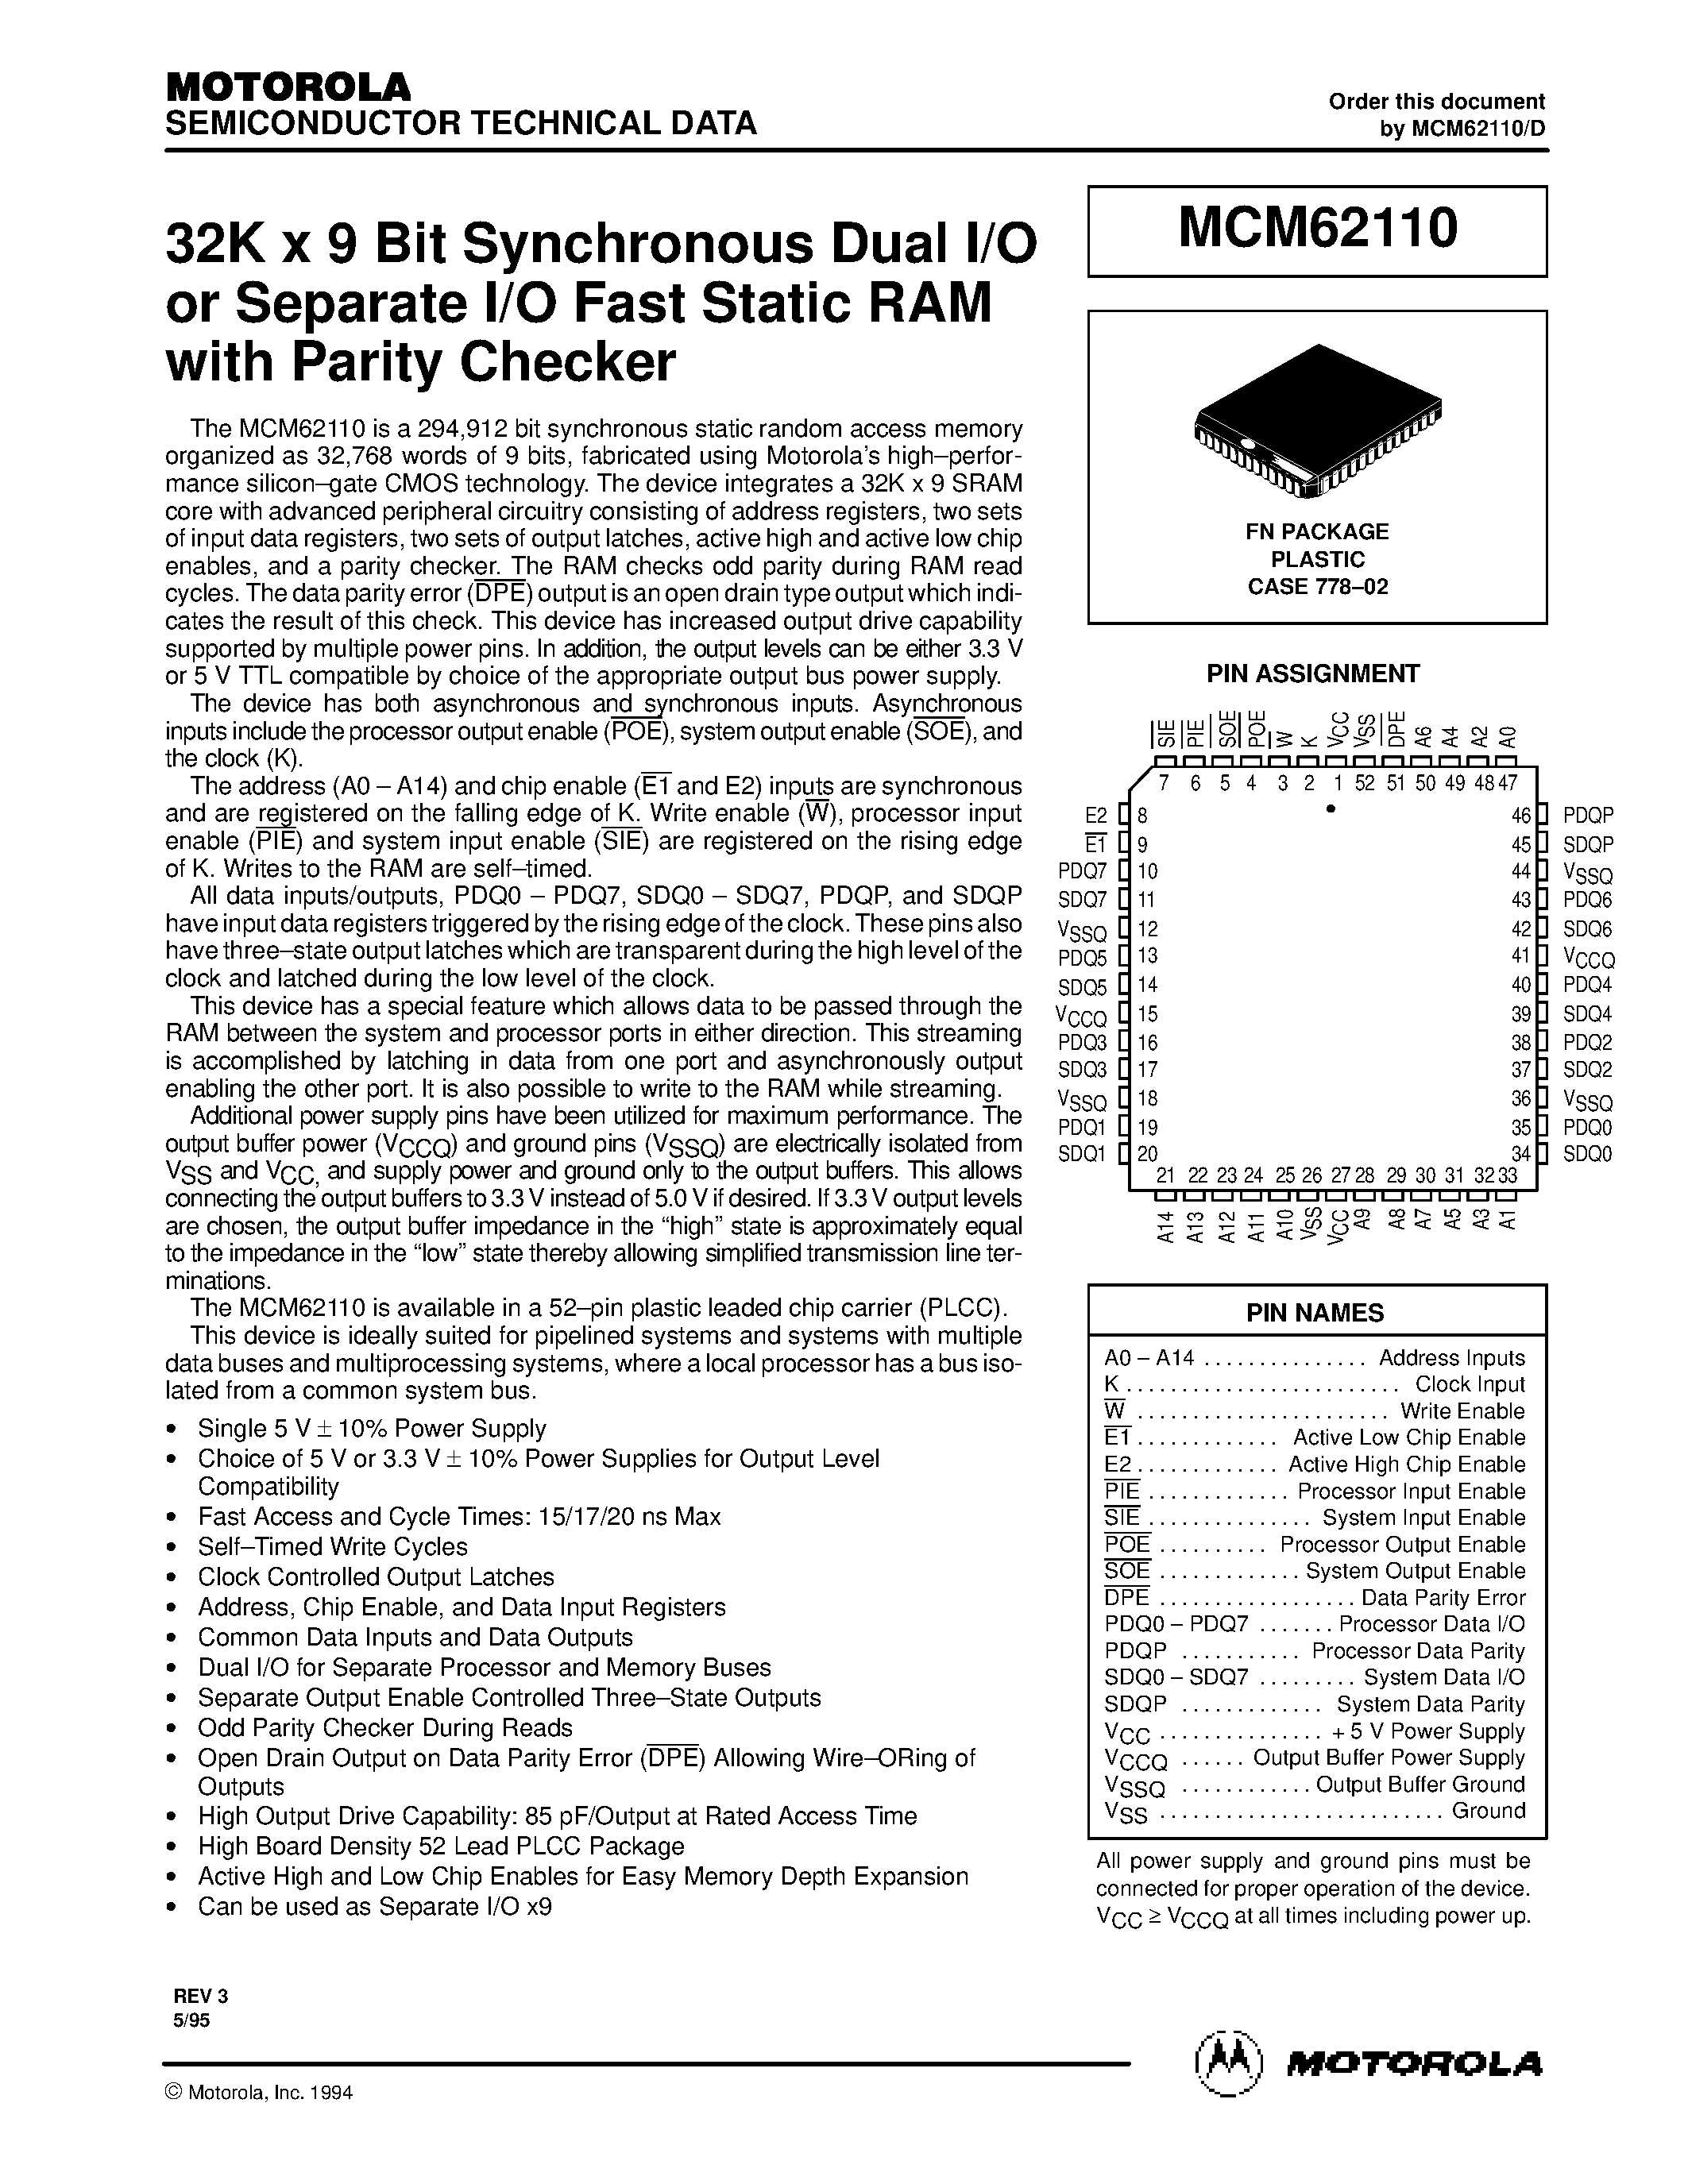 Datasheet MCM62110FN17 - 32K x 9 Bit Synchronous Dual I/O or Separate I/O Fast Static RAM with Parity Checker page 1